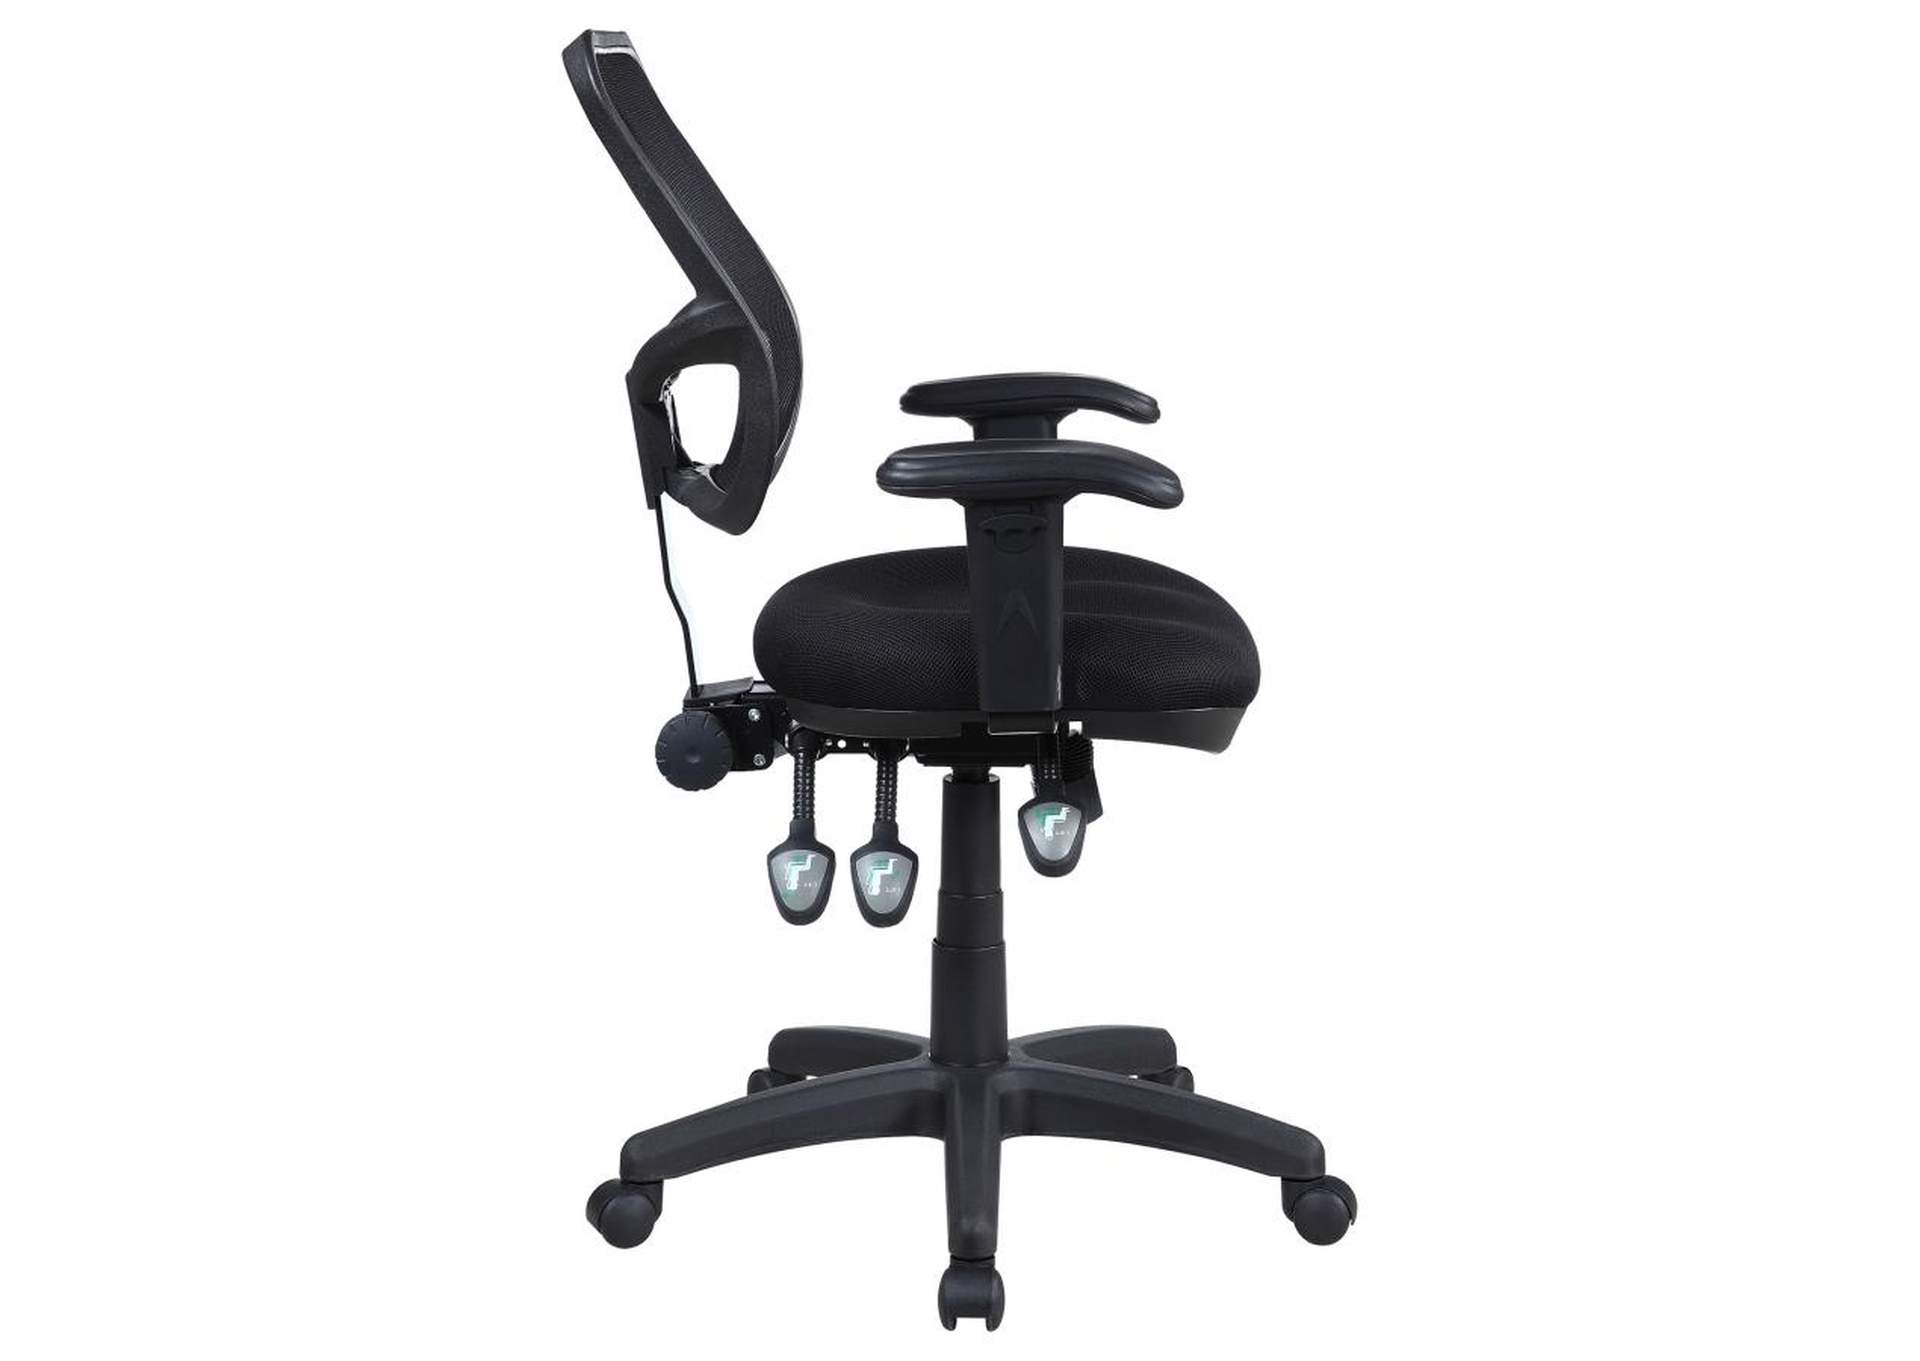 Adjustable Height Office Chair Black,Coaster Furniture